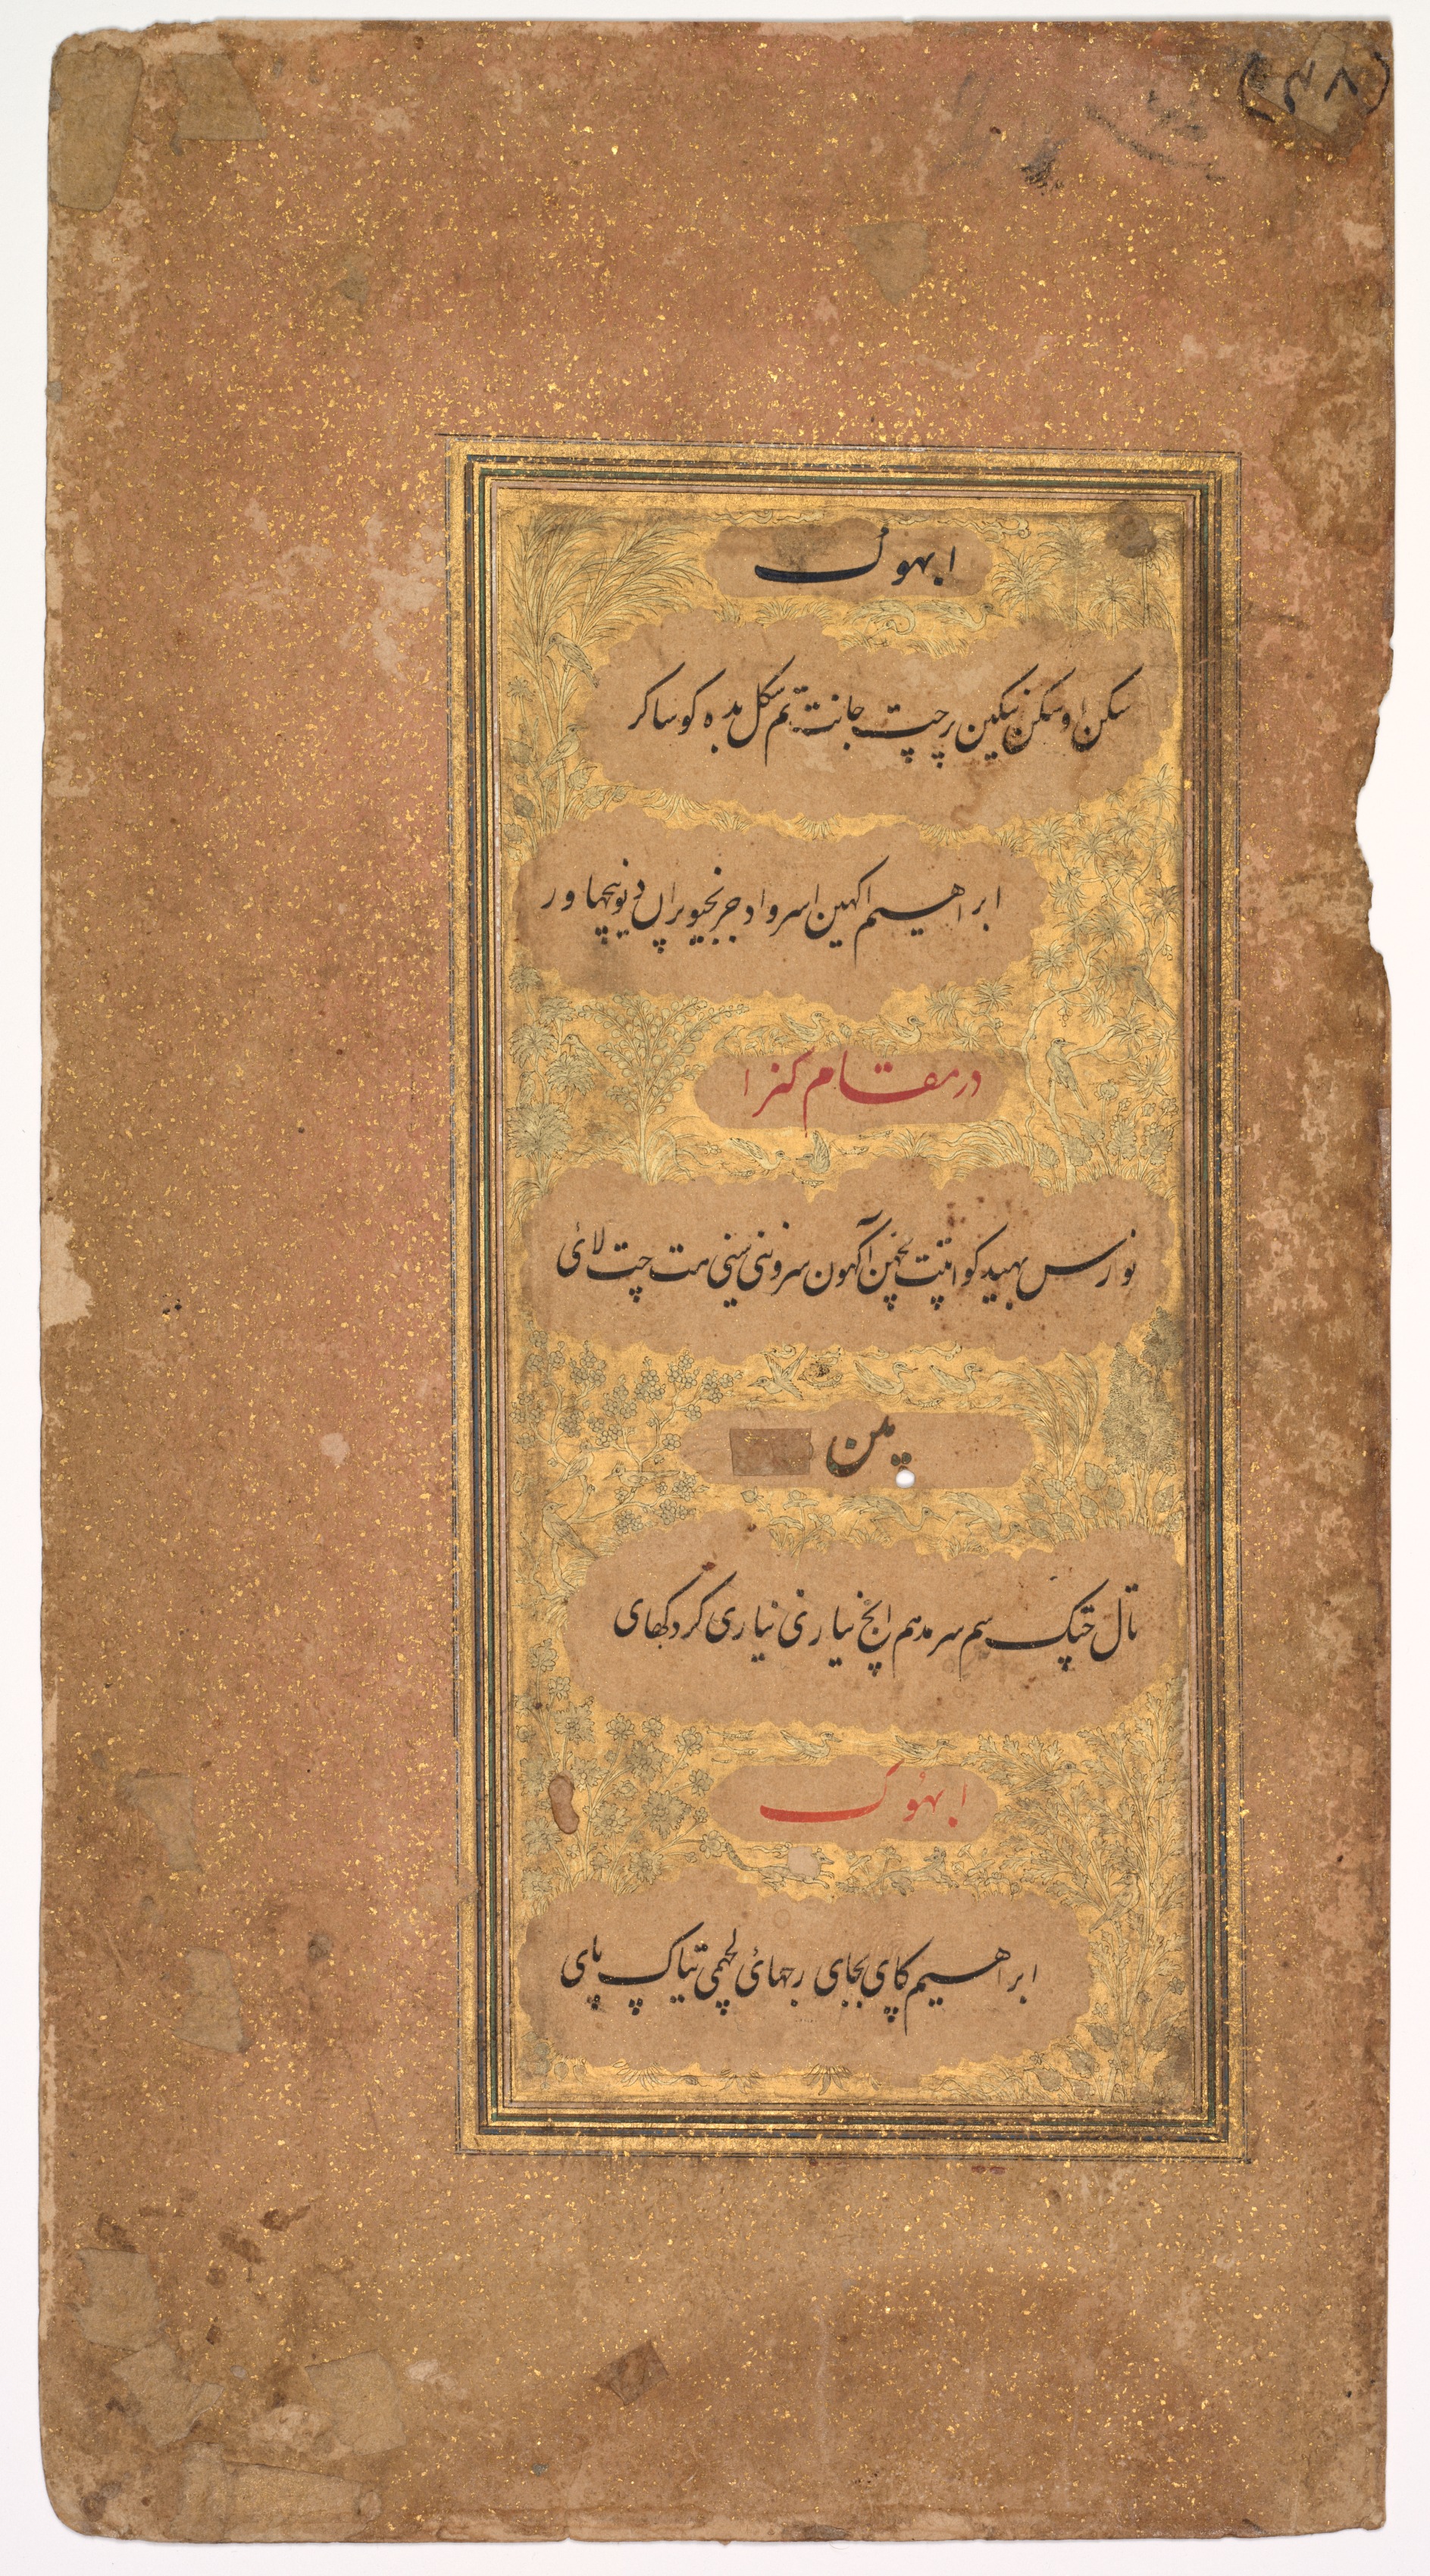 From Dohras (Songs) 40 and 42 from the Kitab-i Nauras (Book of Nine Essences) of Sultan Ibrahim Adil Shah II of Bijapur (r. 1580–1627); verso: From Dohras (Songs) 40 and 36 from the Kitab-i Nauras of Sultan Ibrahim Adil Shah II